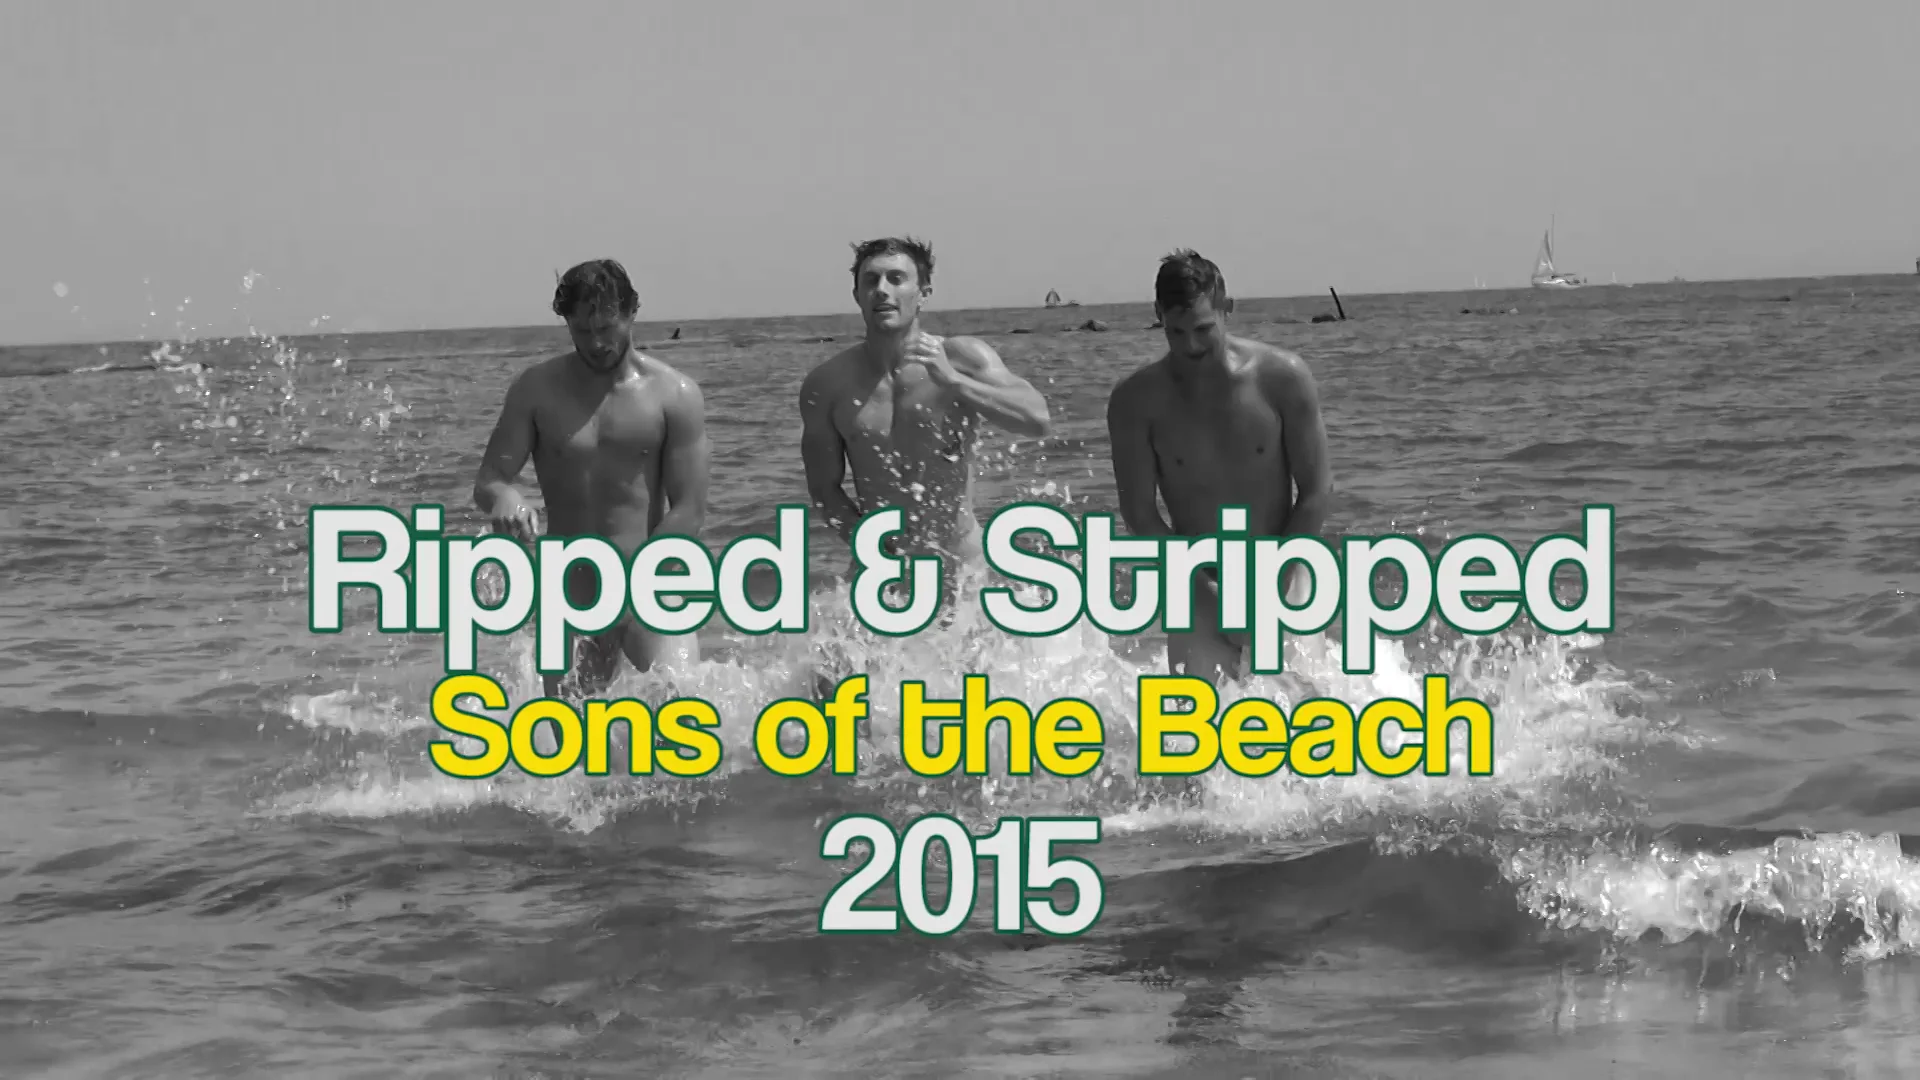 assif siddiqui recommends Stripped At Beach